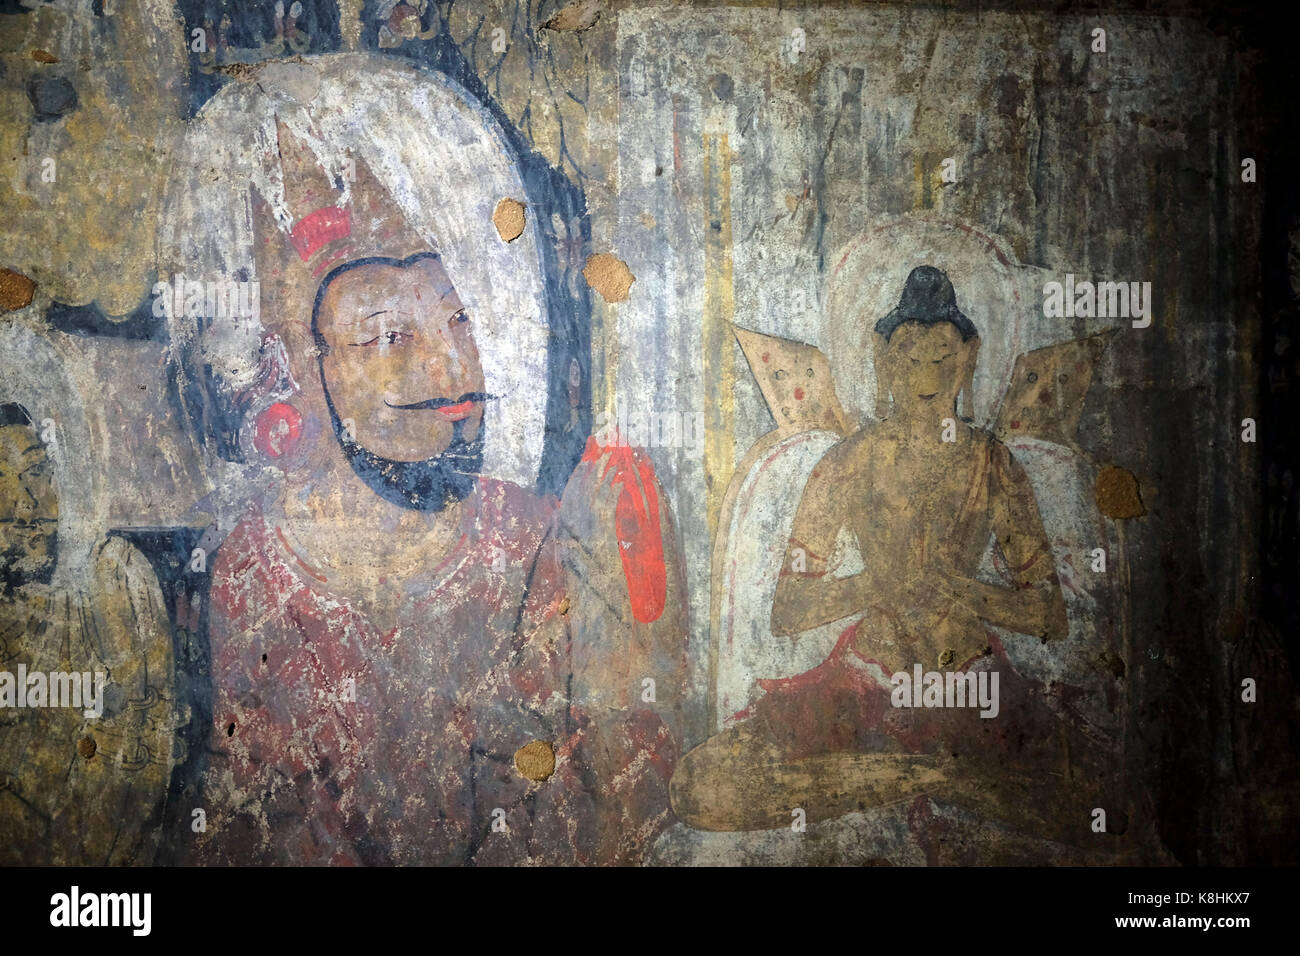 Burma, Myanmar: Bagan Archaeological Zone with a detail of the mural in the Patho Tha Mya Temple Stock Photo